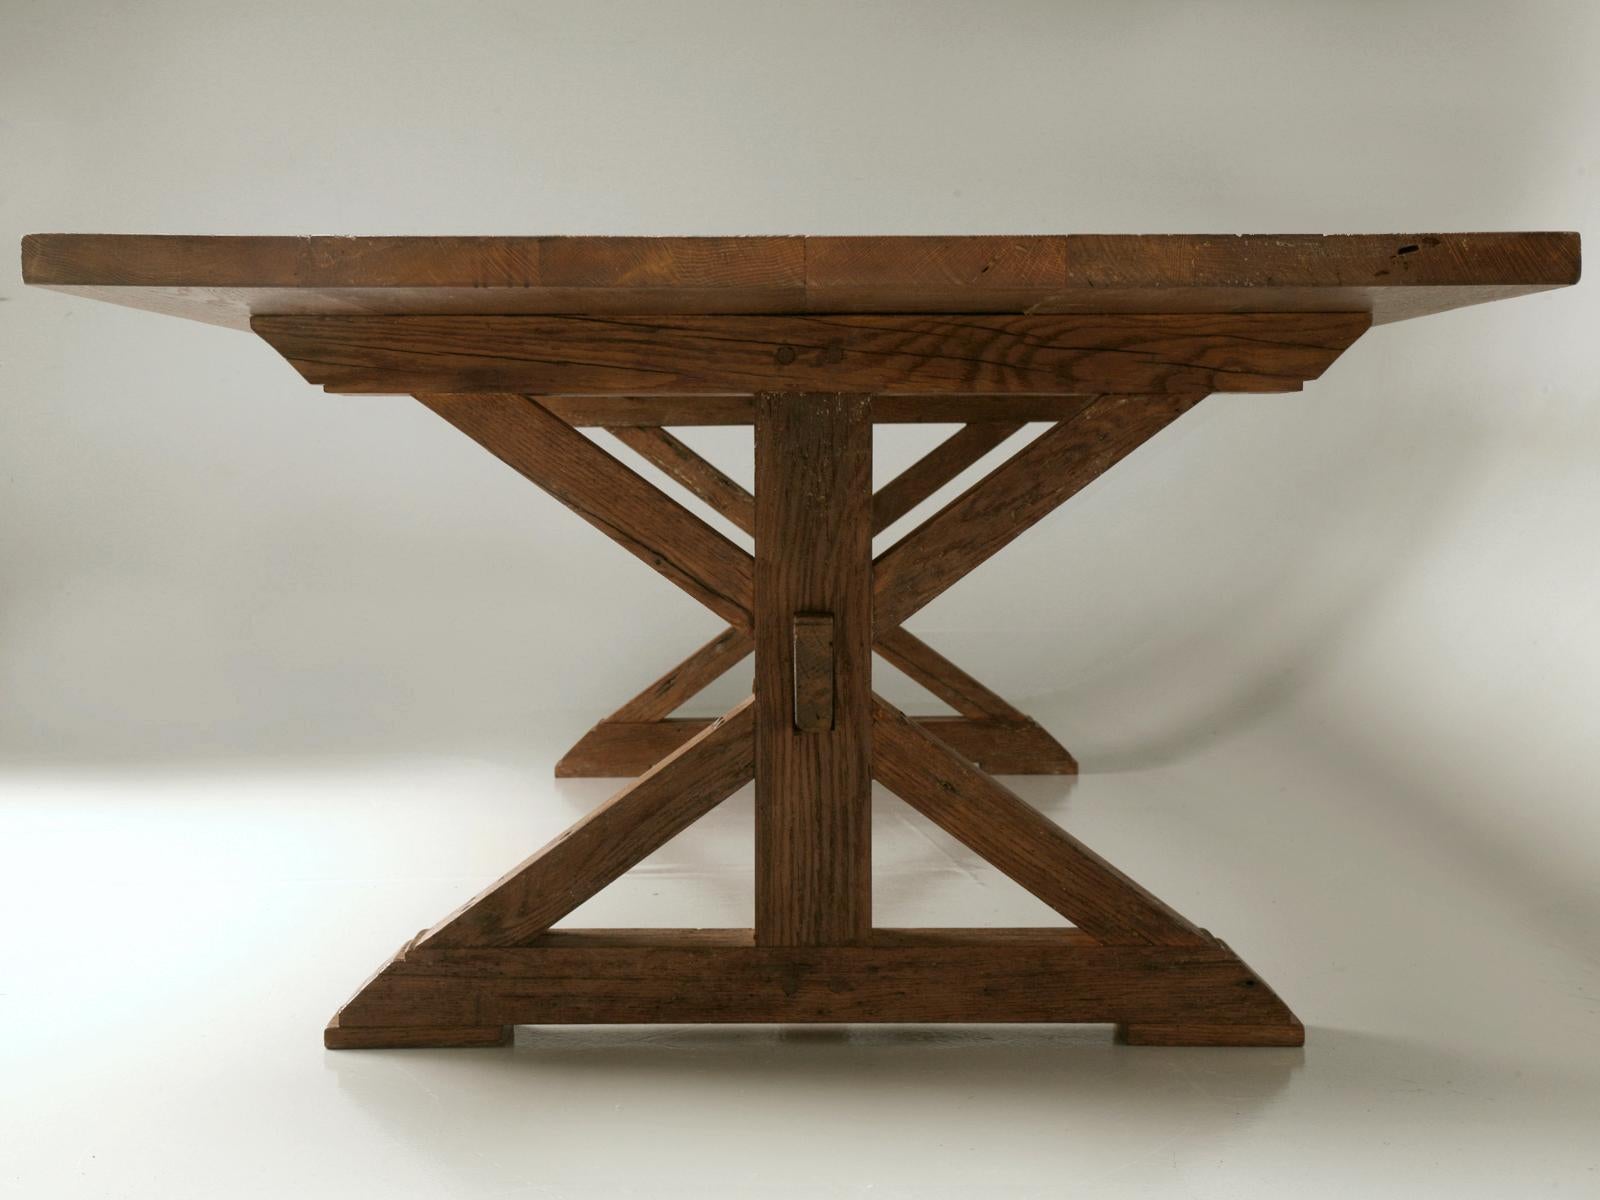 American French Inspired Dining or Farm Table Reclaimed Oak Made to Order Any Size, Color For Sale